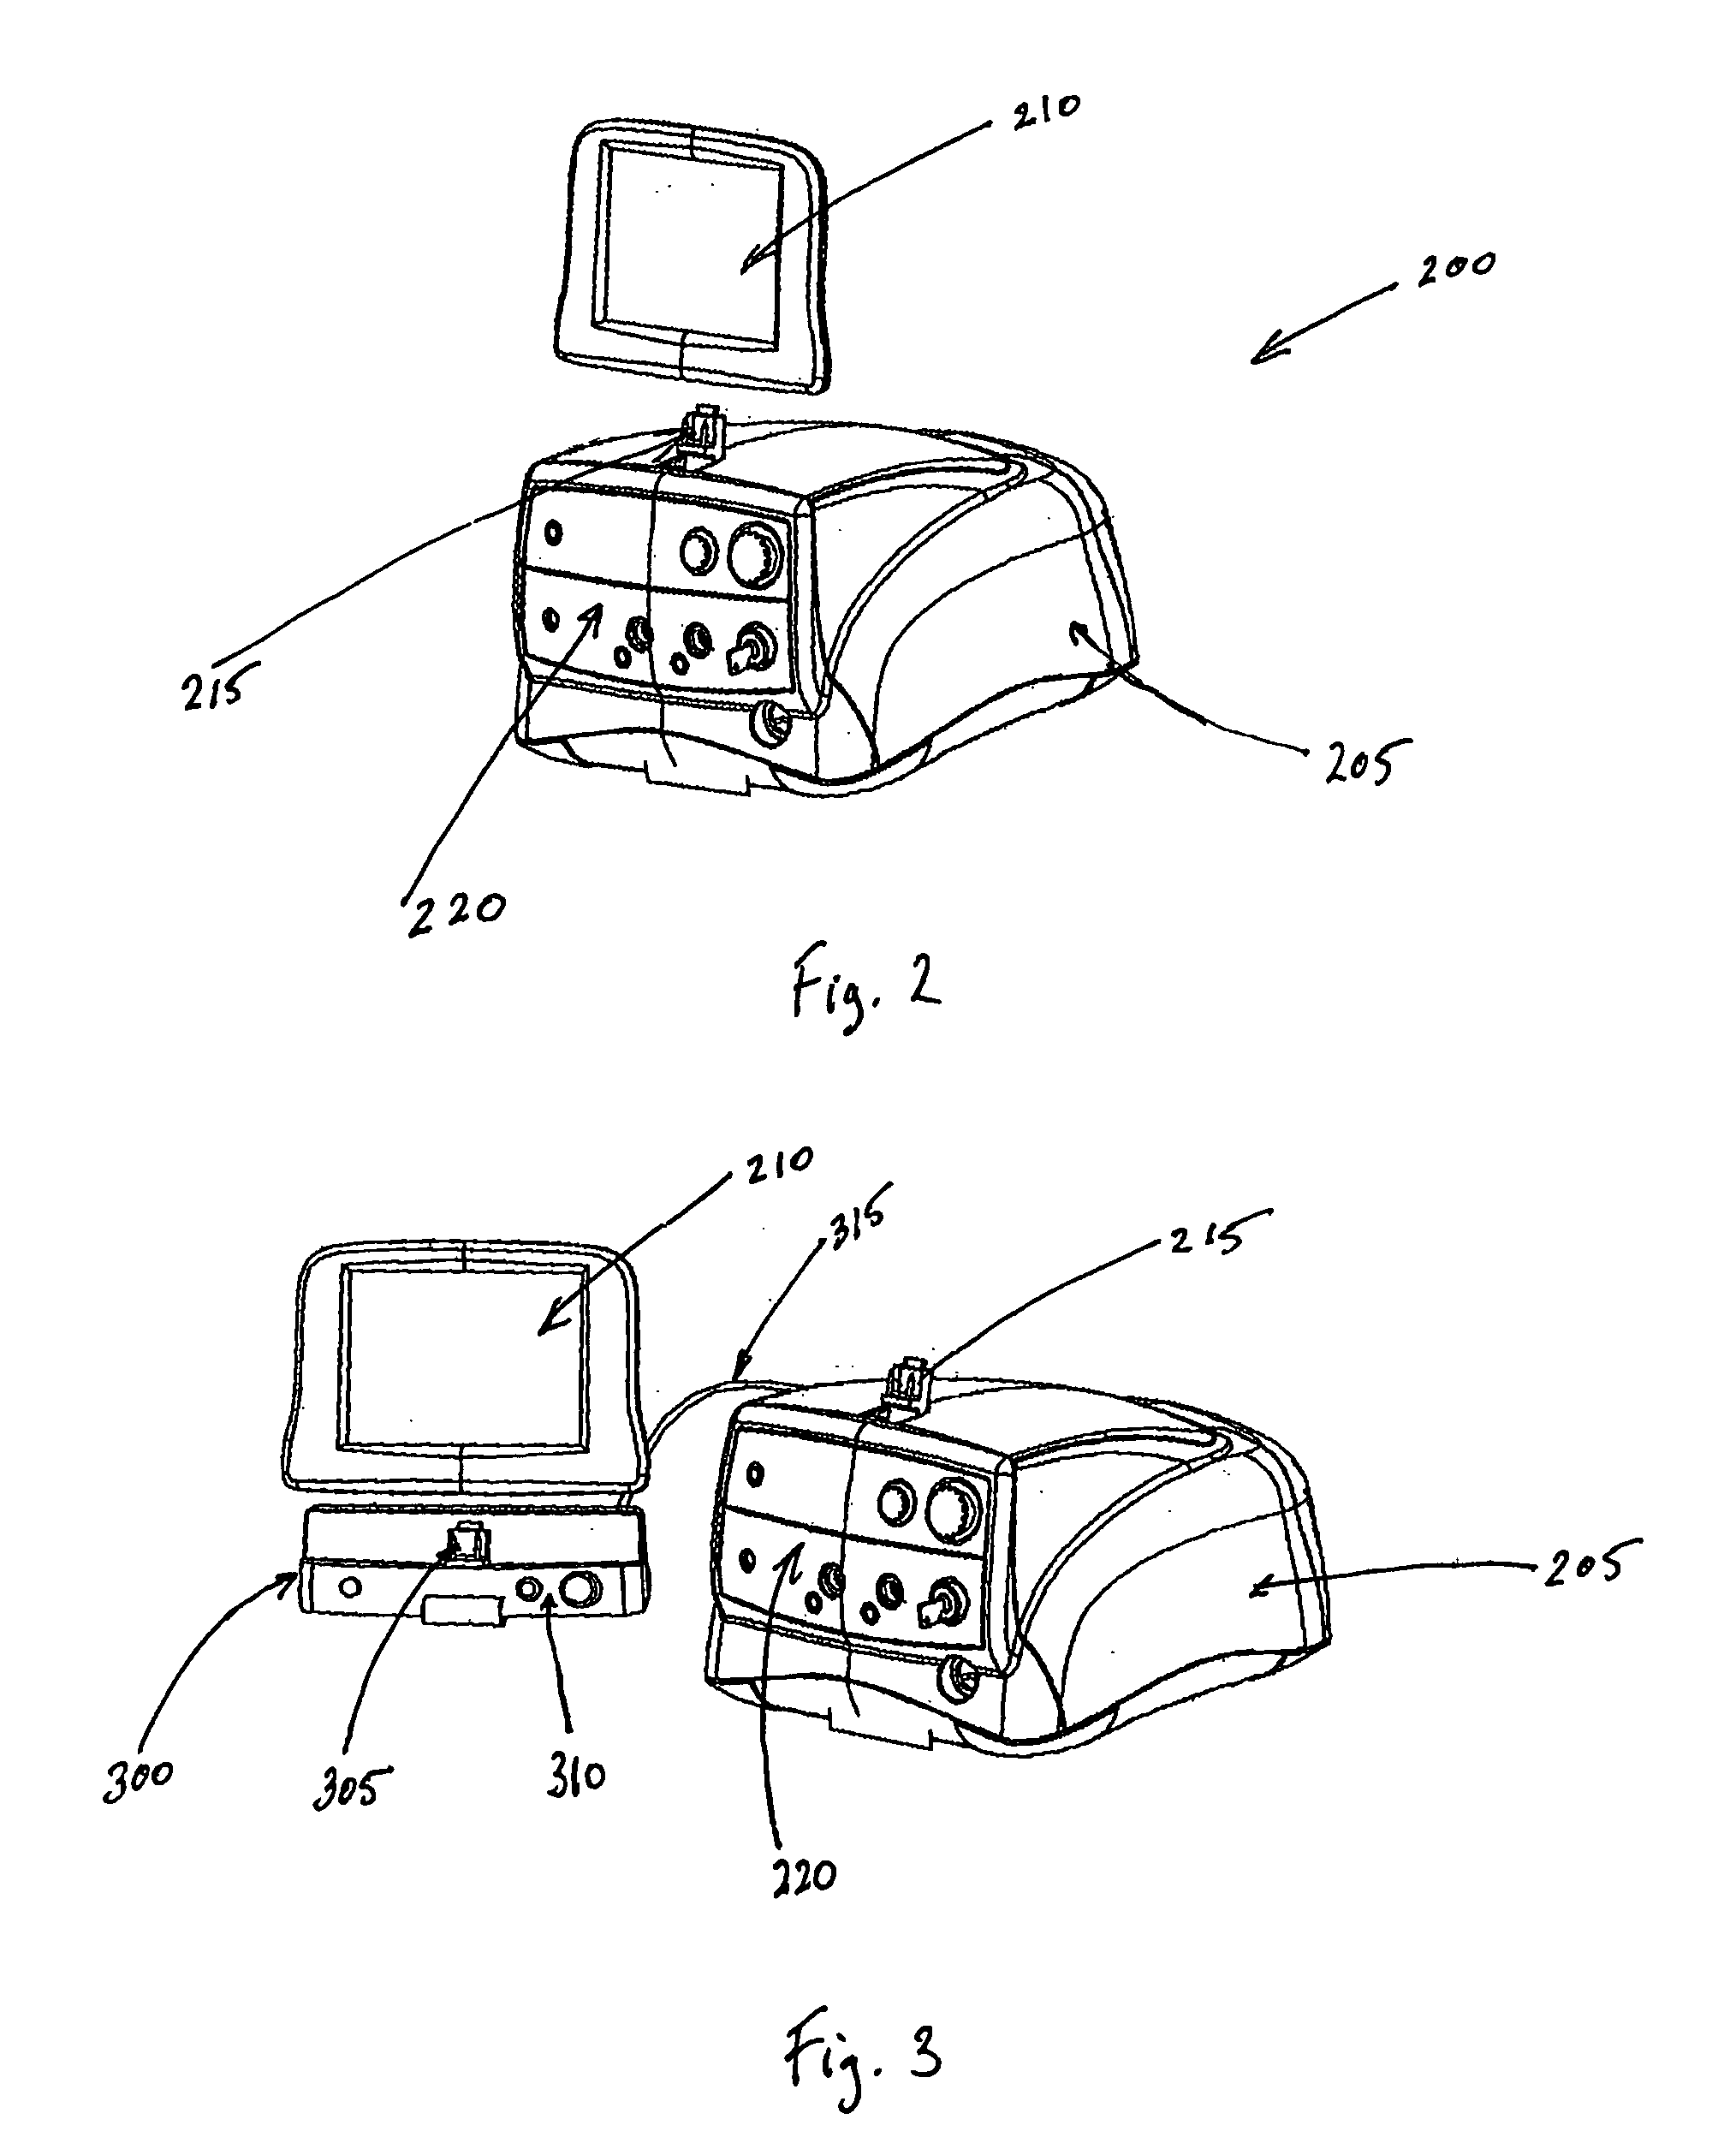 Surgical machine with removable display